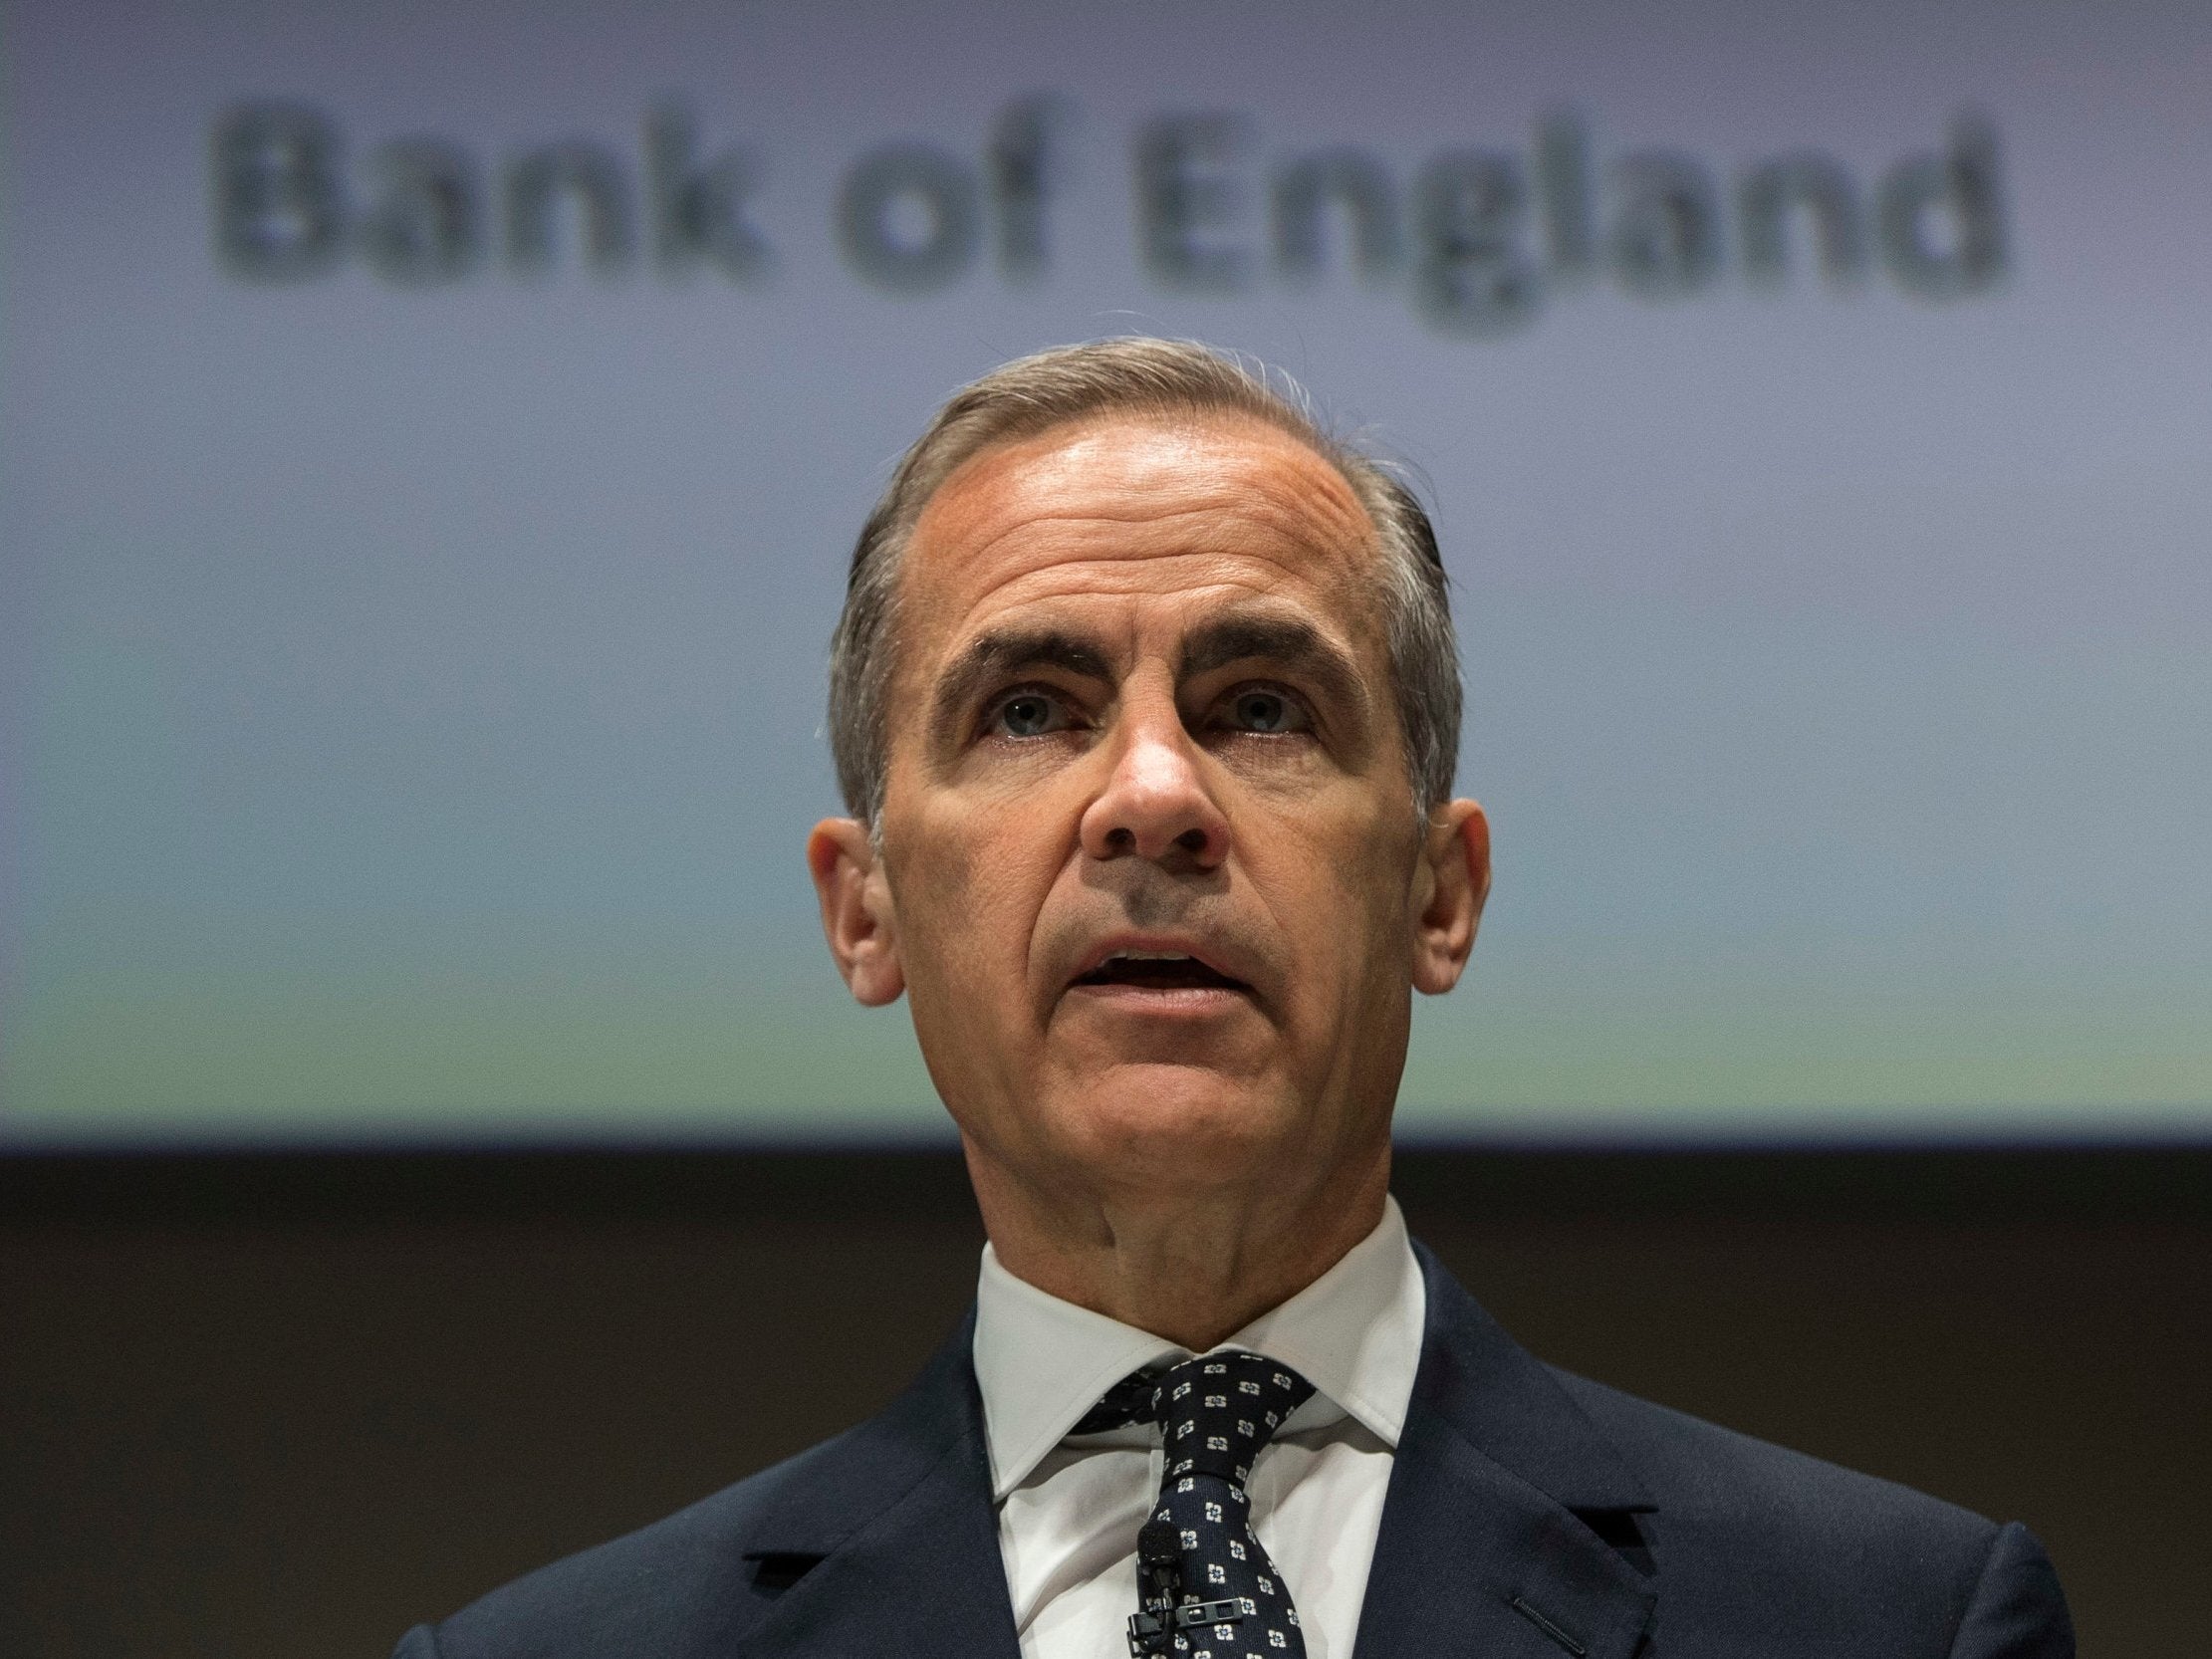 Carney made the speech at a press conference